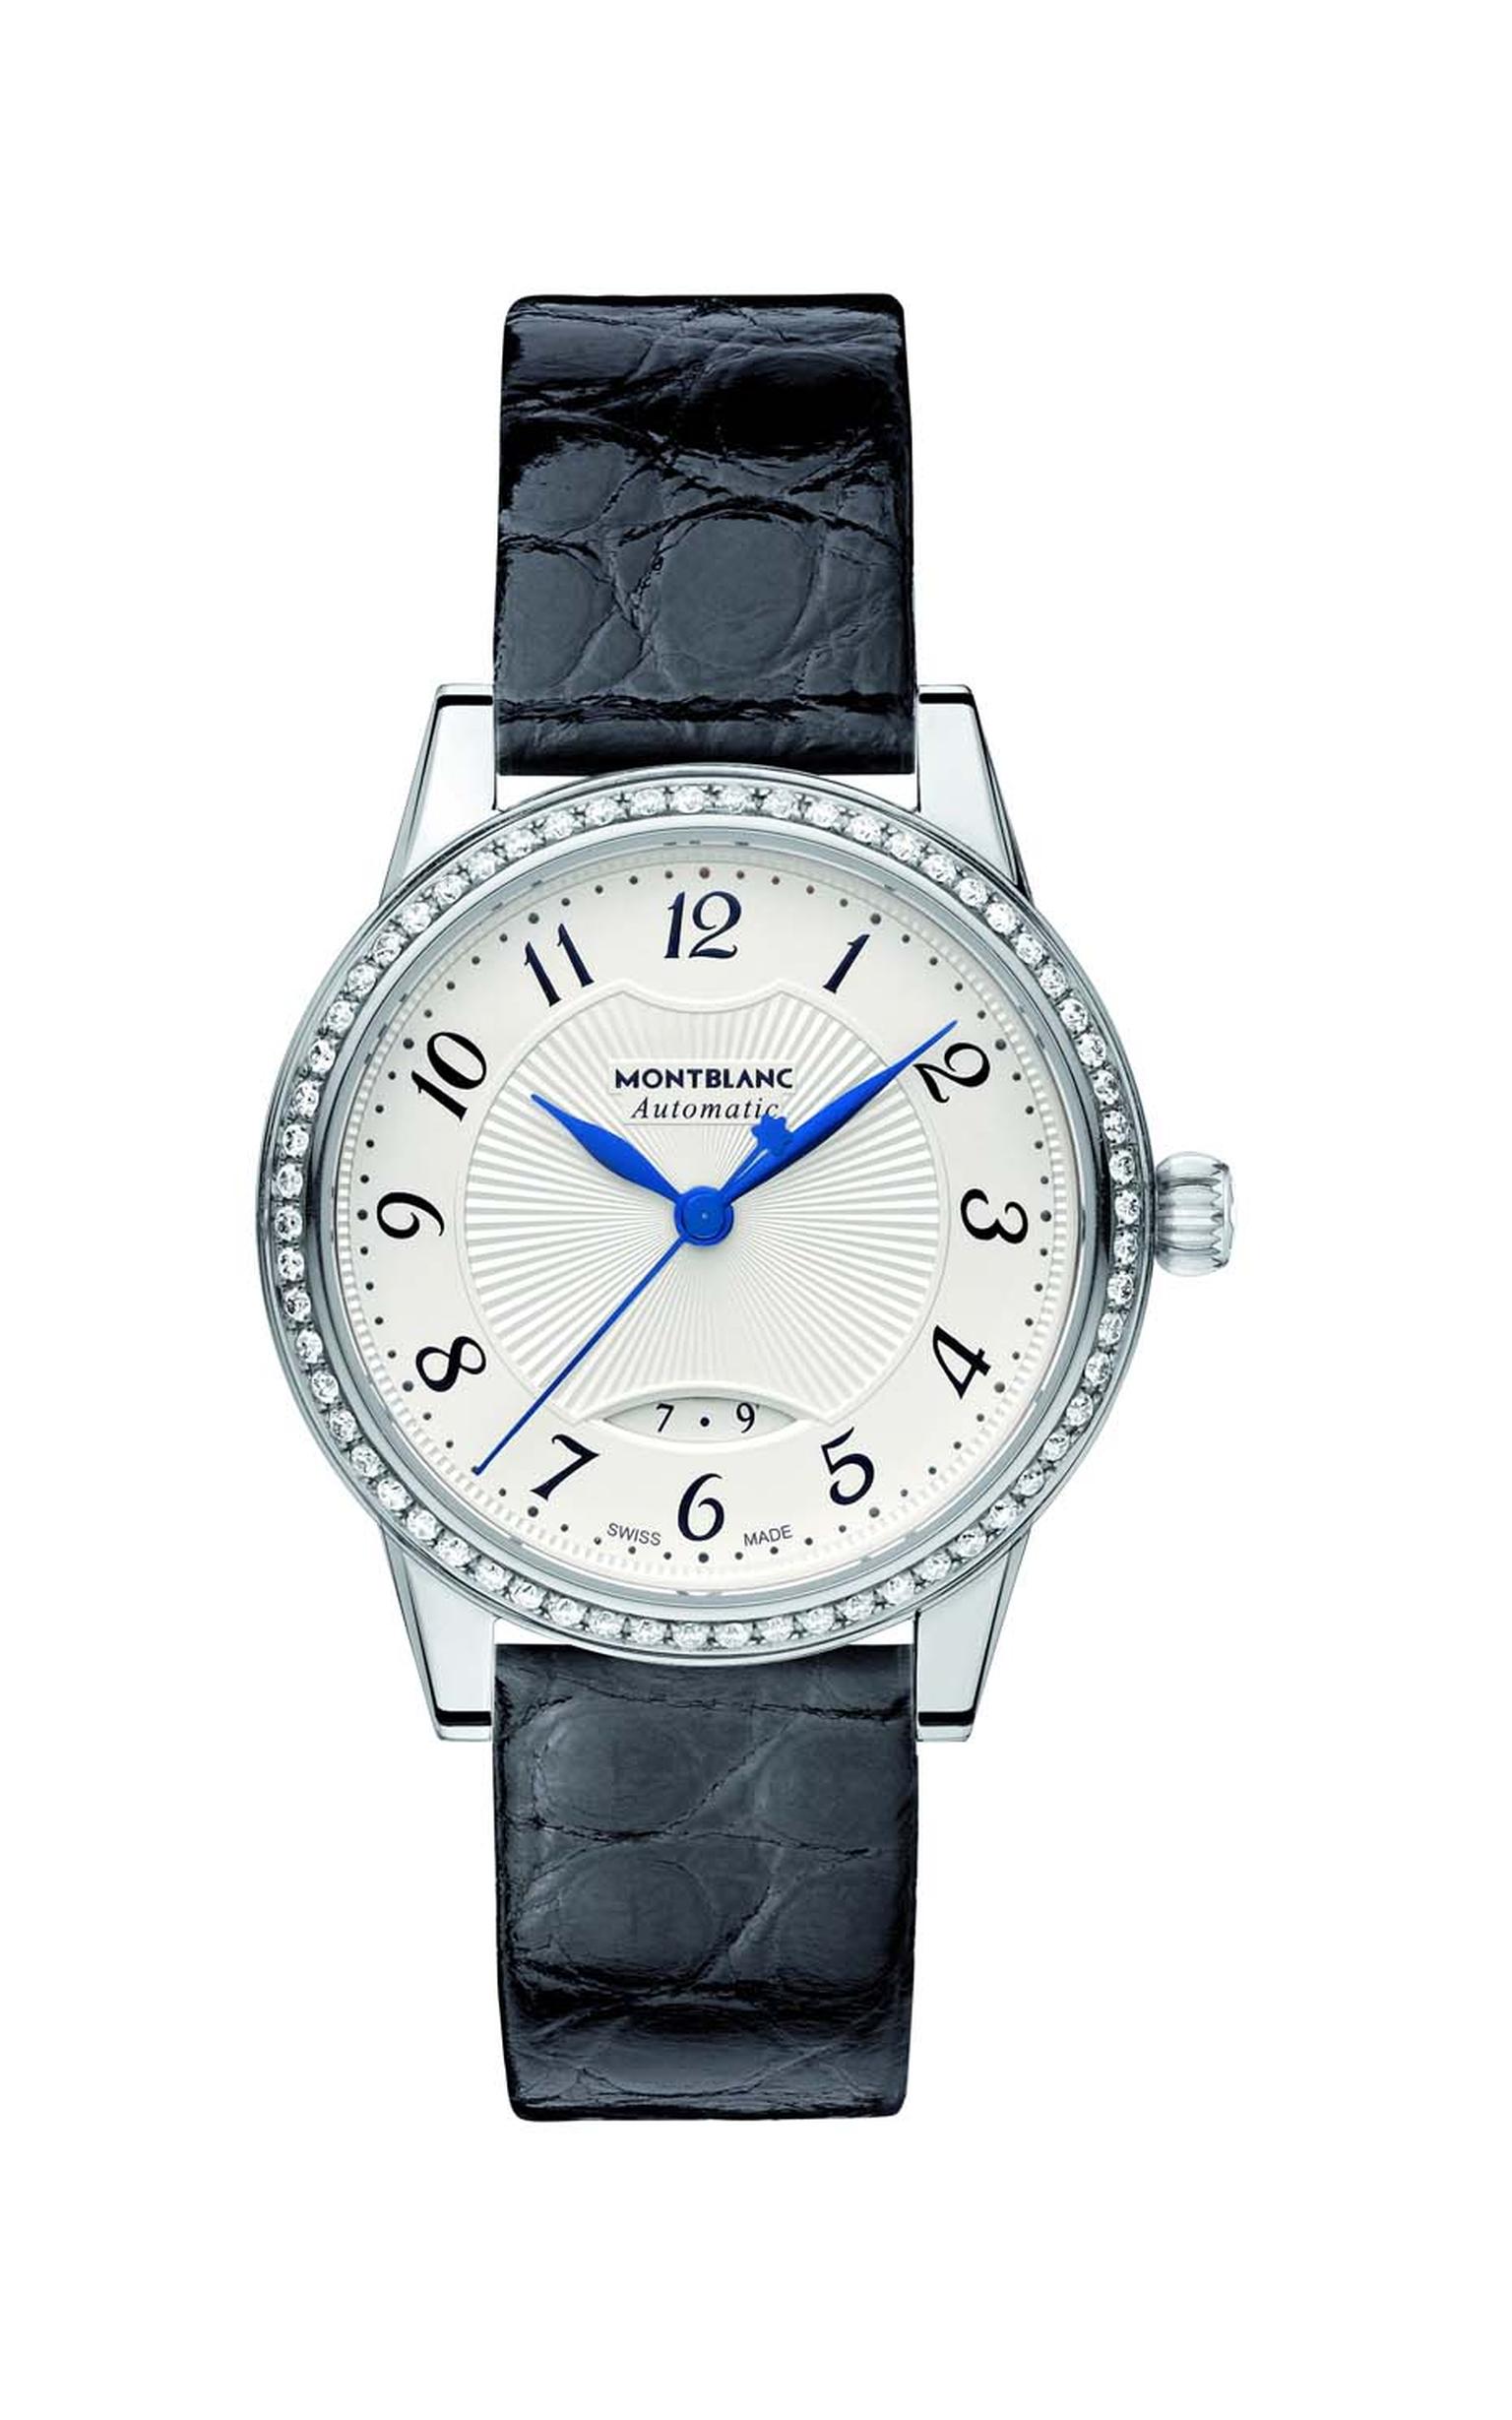 The Montblanc Bohème Date Automatic watch features an elliptical date window at 6 o’clock, with delicate floral Arabic numerals and a sunburst guilloché pattern in the centre, enhanced with a diamond-set bezel (£3,390).